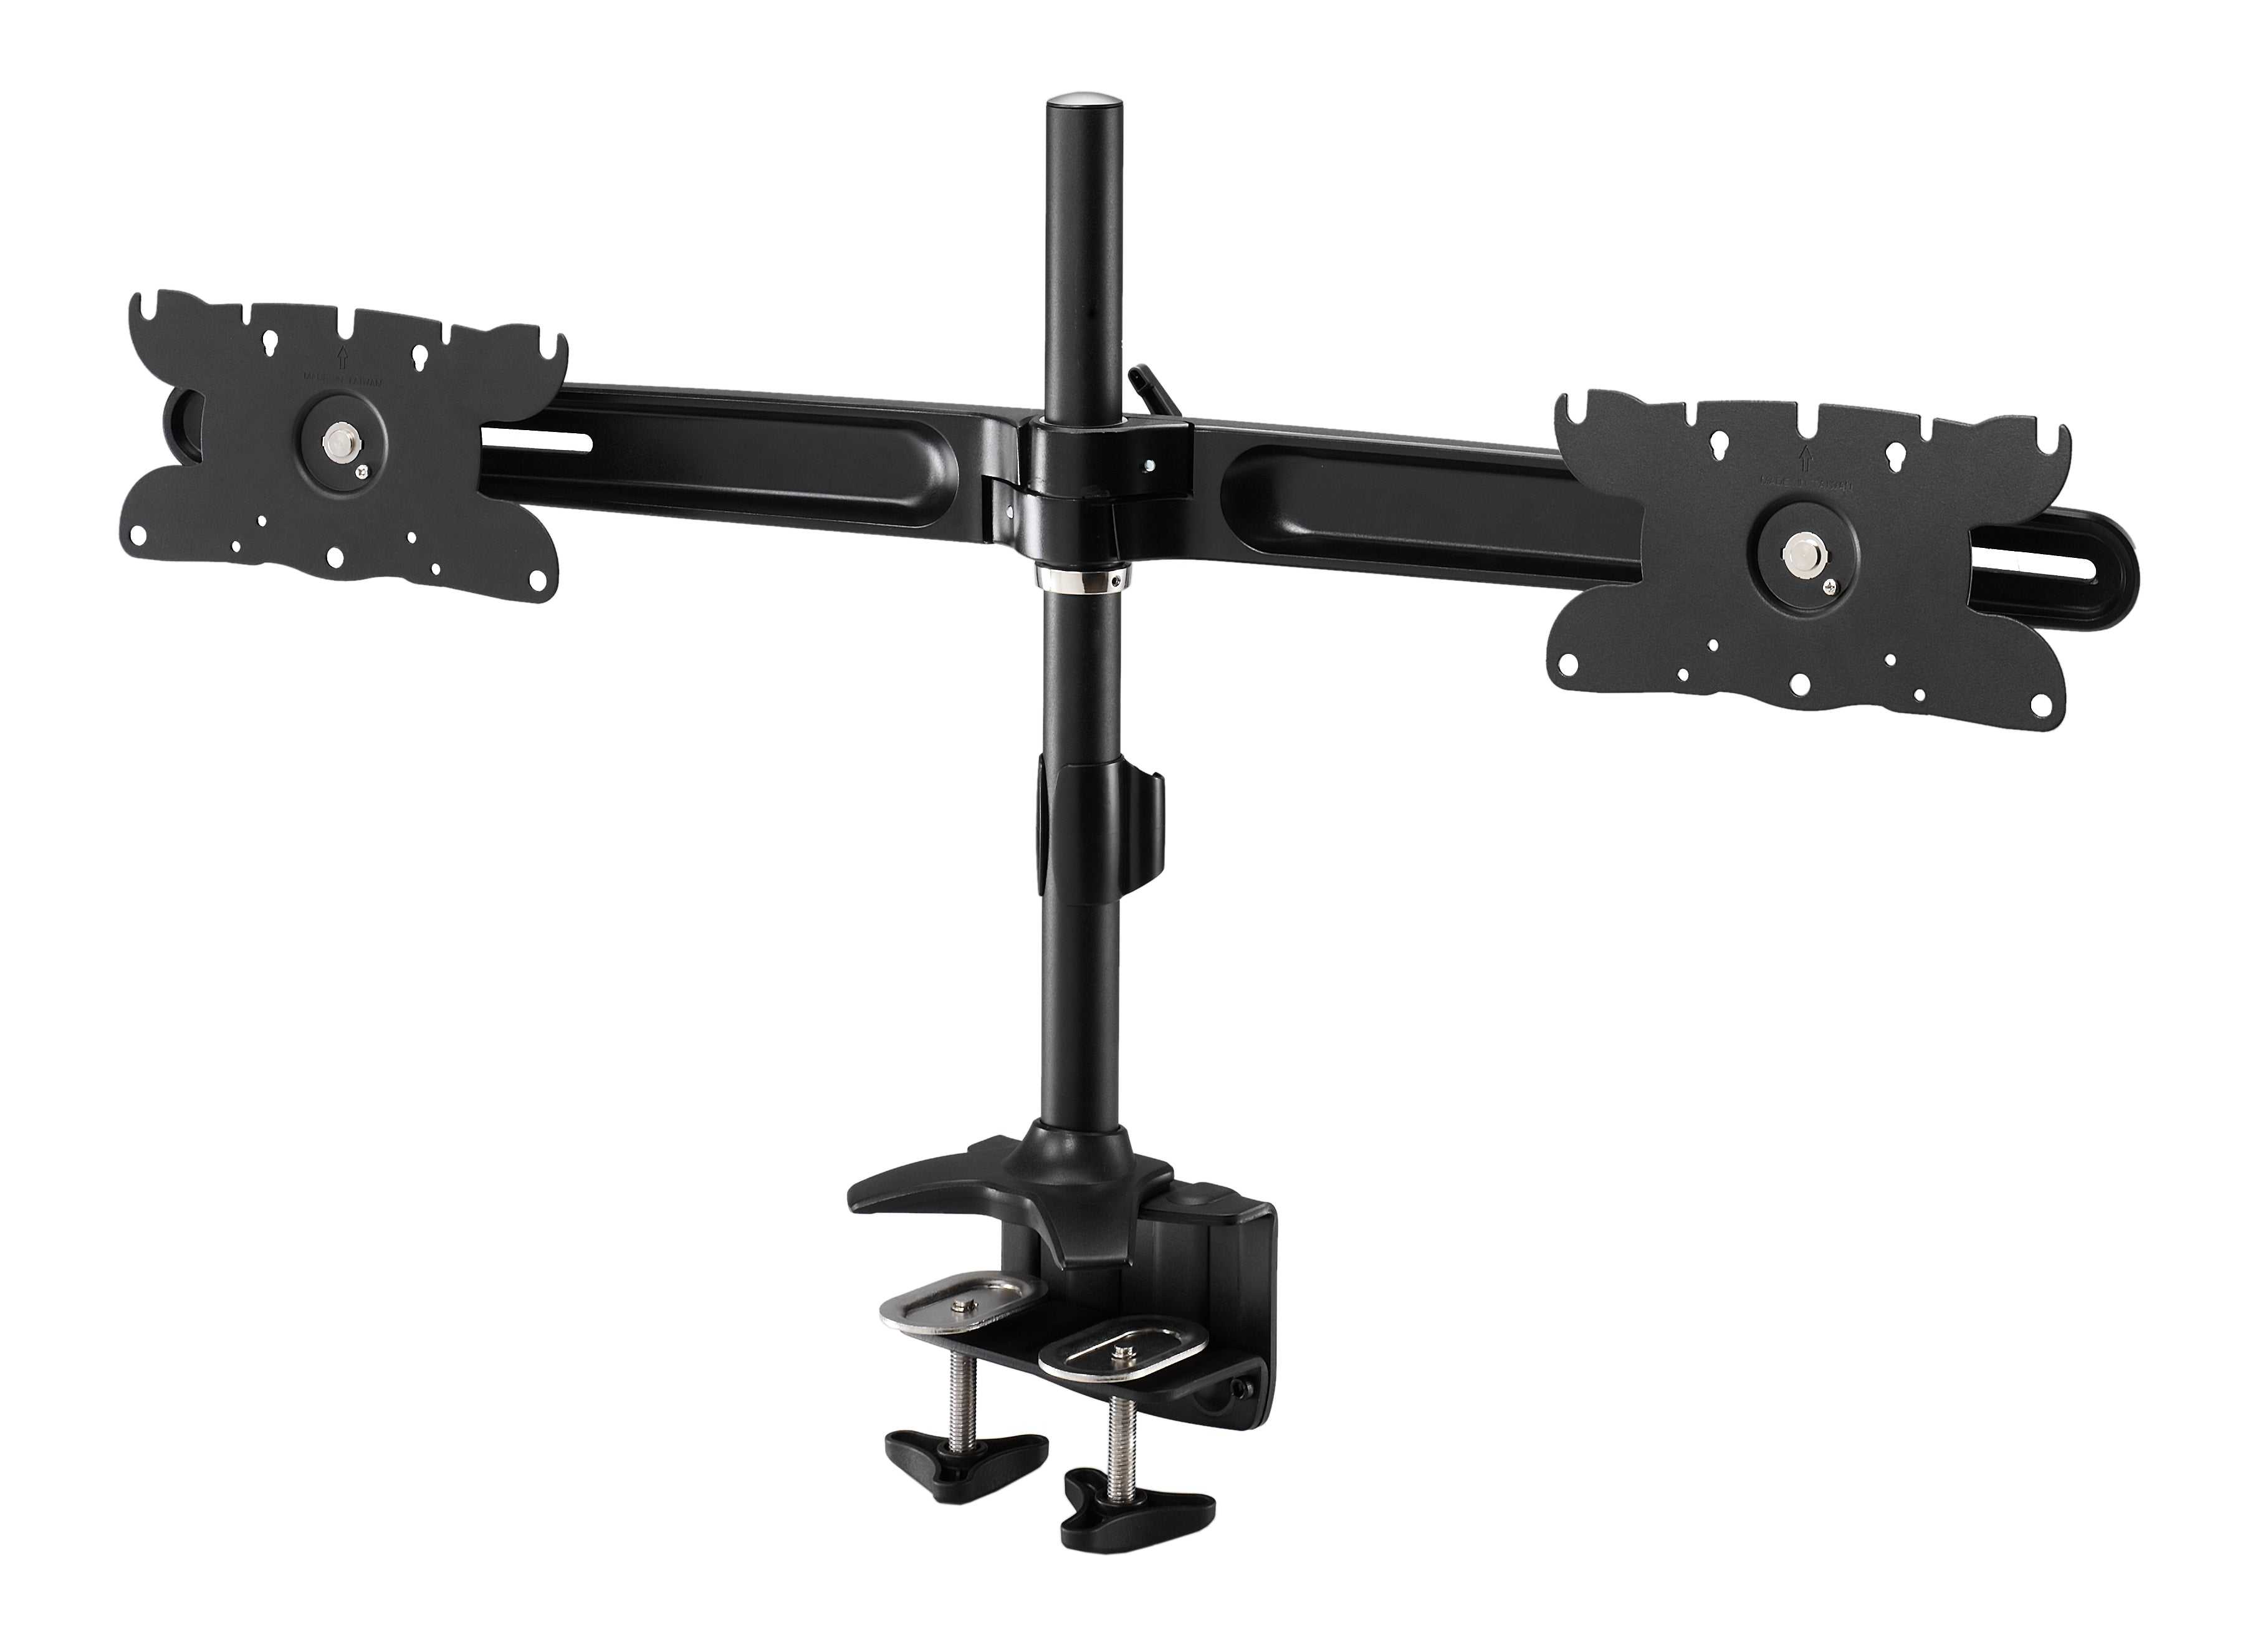 AMER NETWORKS, Dual Monitor Desk Clamp Mount,Mnt